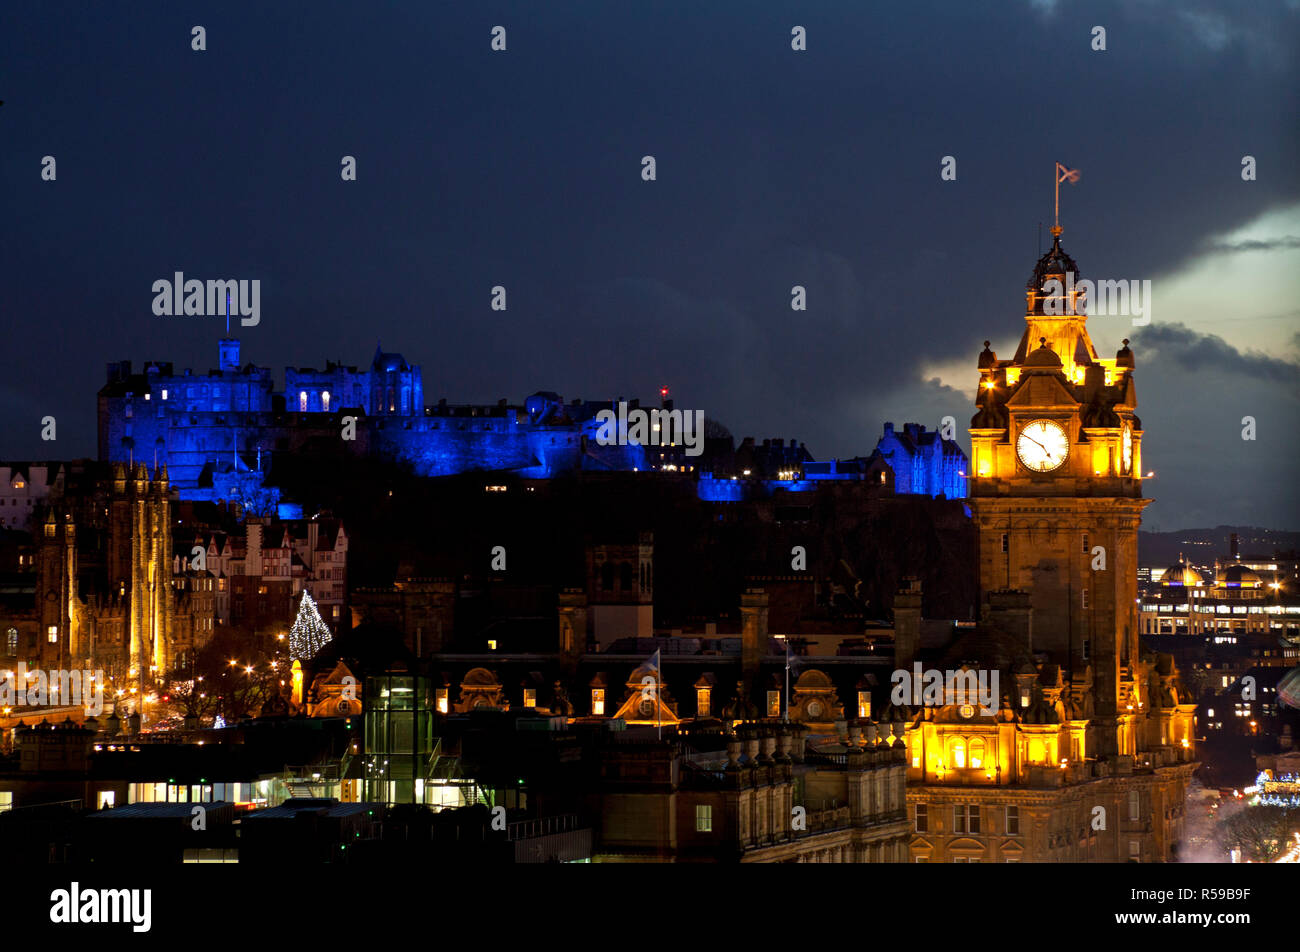 Edinburgh, Scotland, UK. 30th Nov, 2018. Edinburgh Castle suitably dressed to celebrate St Andrew's night by lighting its walls and ramparts with blue floodlights. Stock Photo